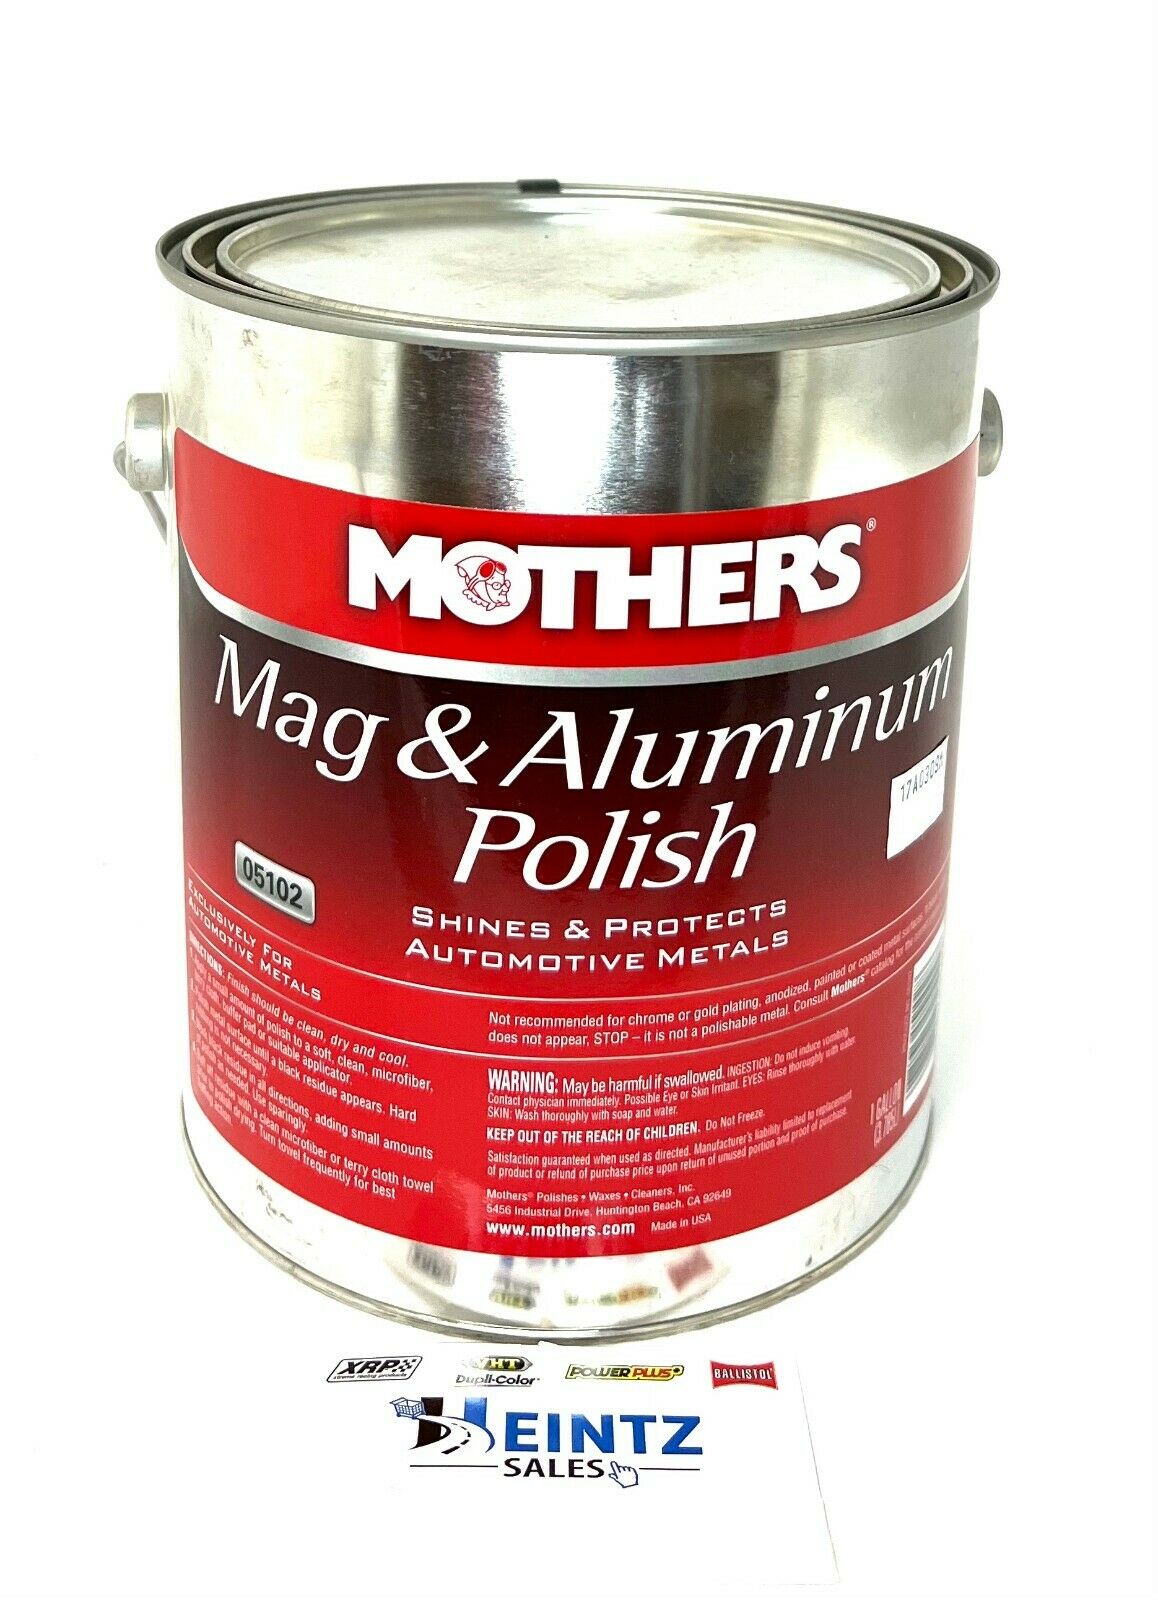 MOTHERS 05102 Mag & Aluminum Polish - Shines & Protects - Brass - 1 GALLON